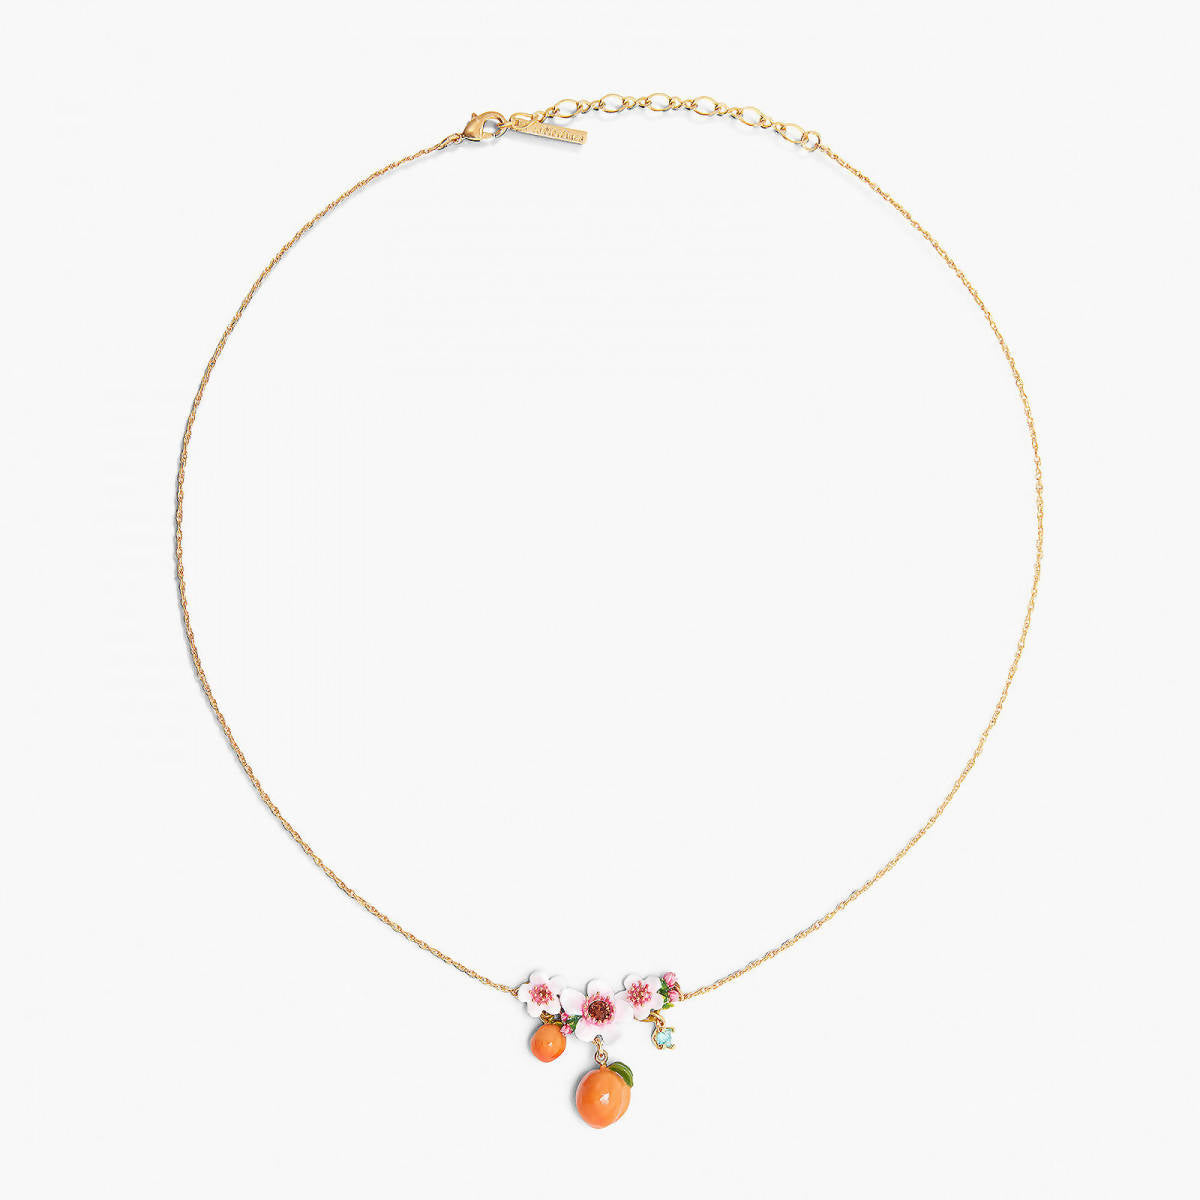 APRICOTS AND FLOWERS STATEMENT NECKLACE - Yooto